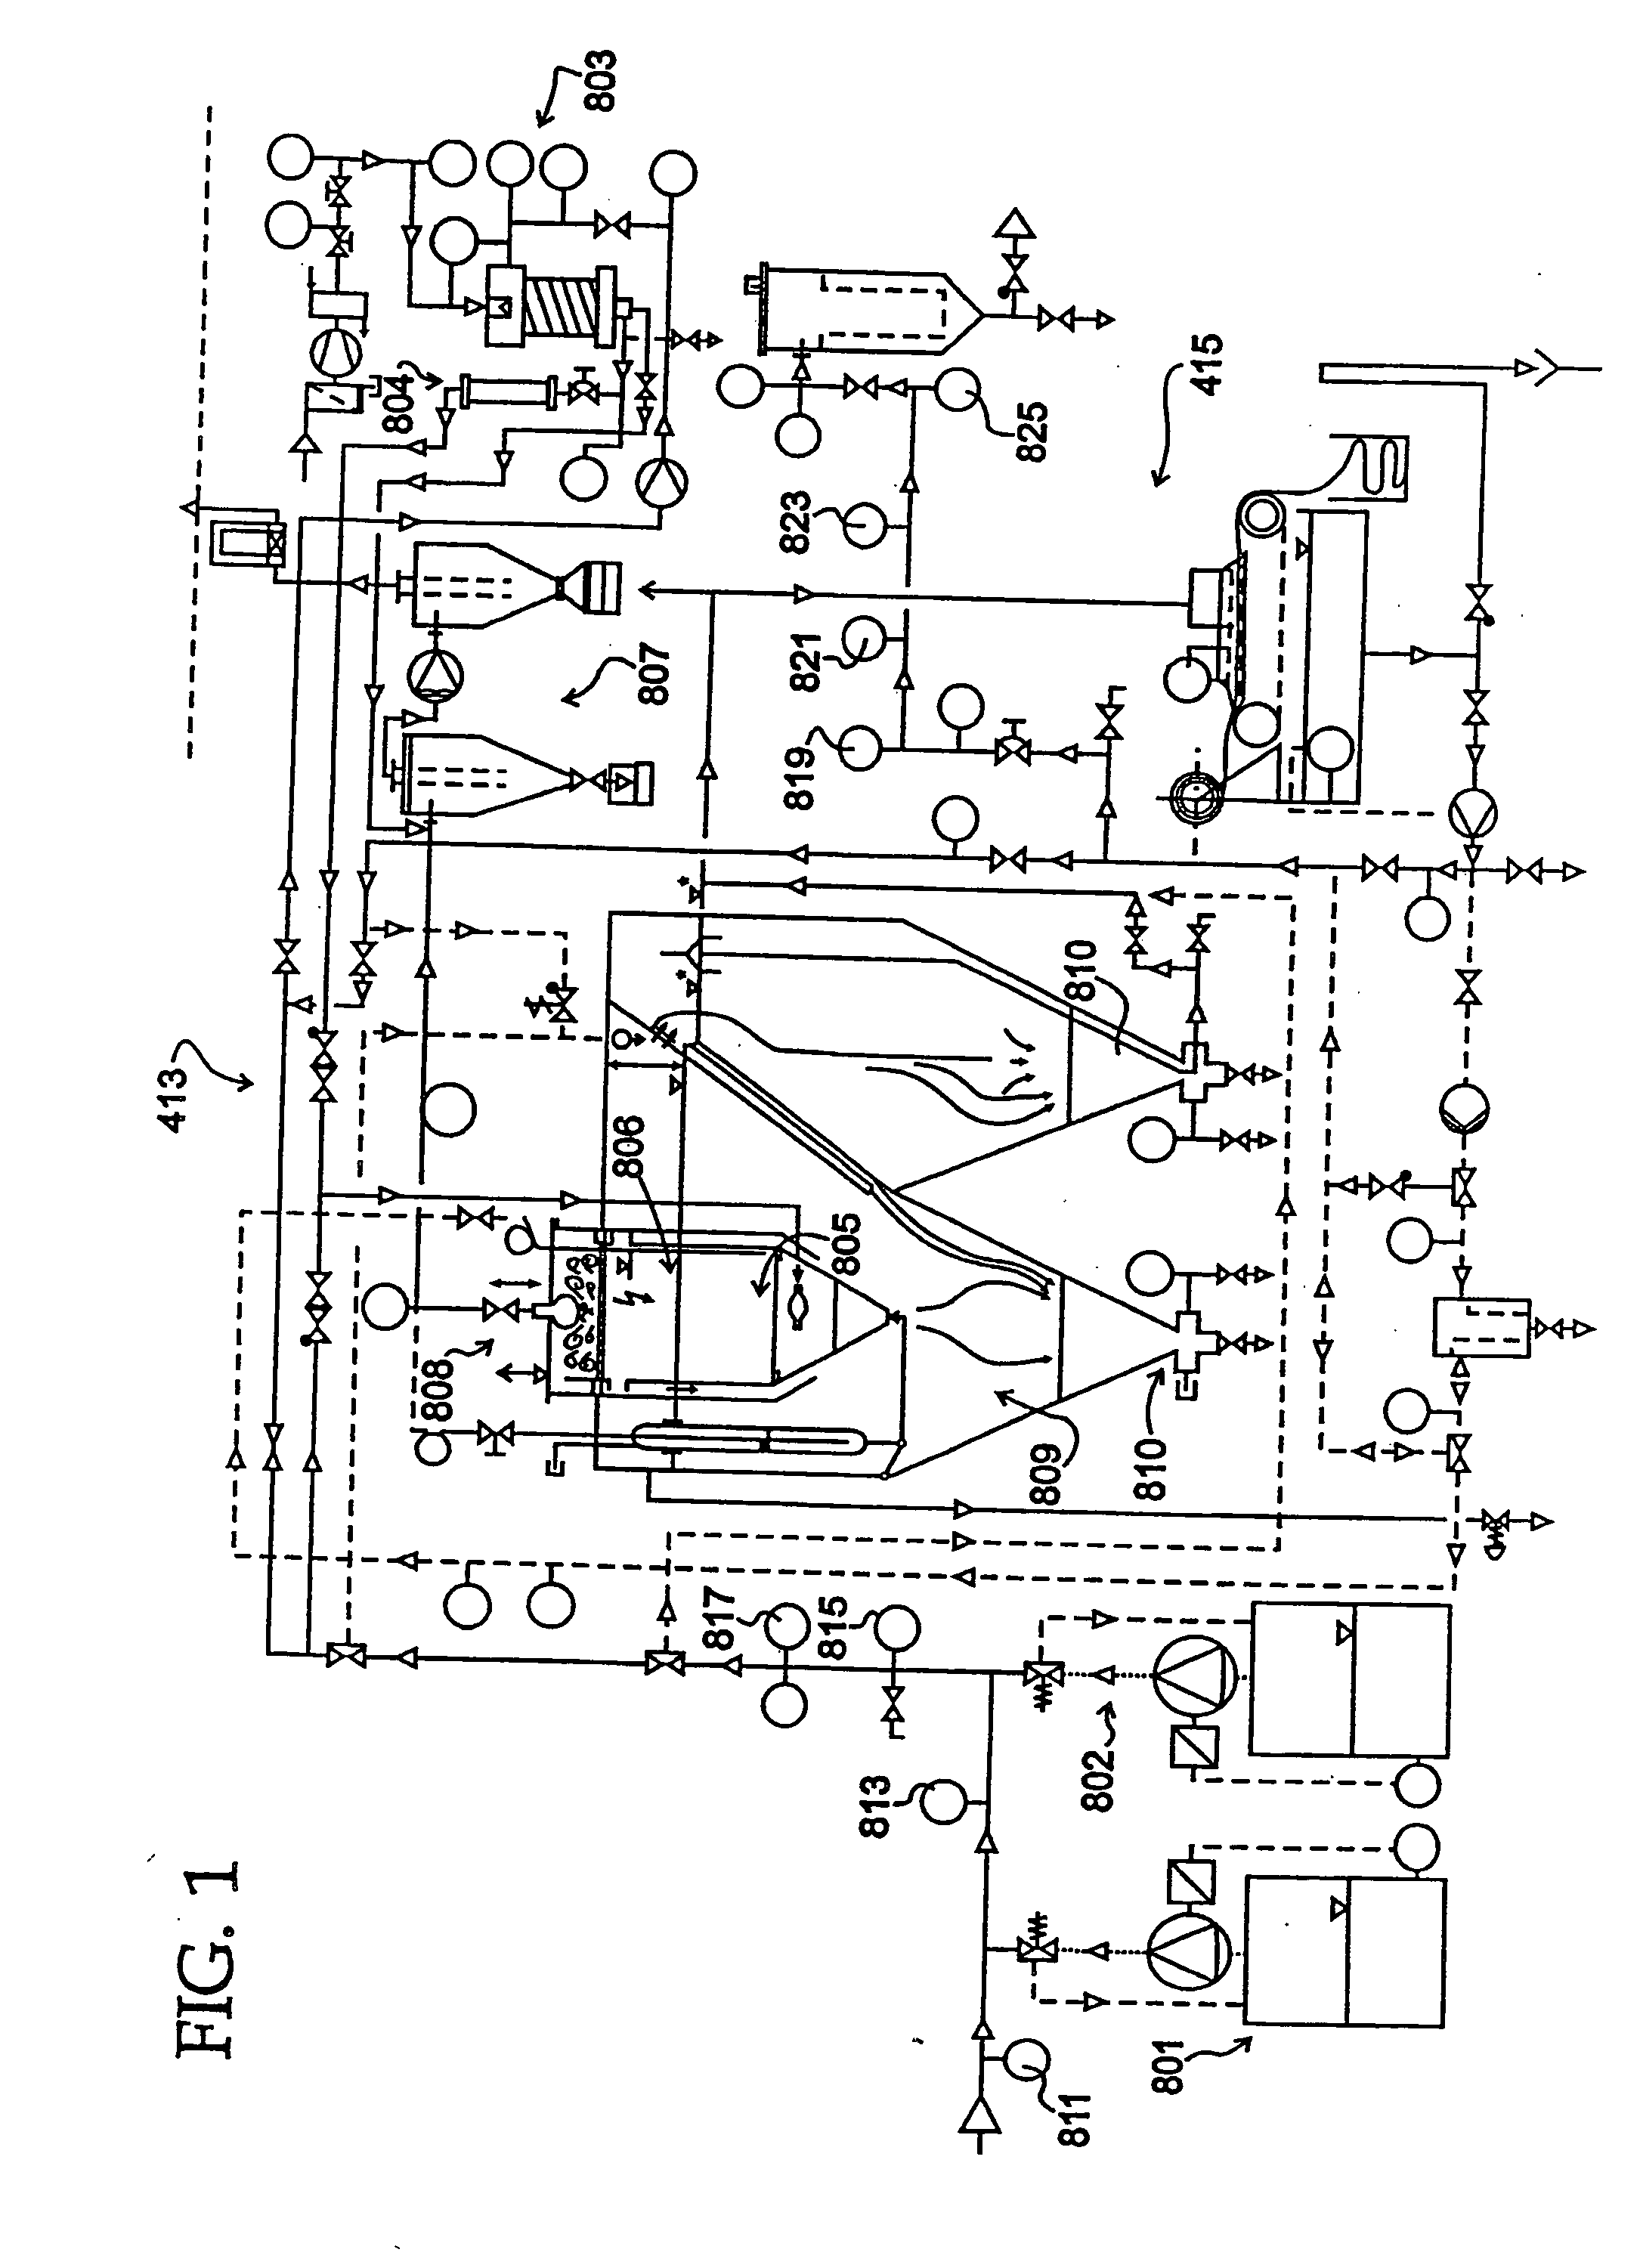 Fluid head height and foam/gas level control in electrocoagulation apparatus